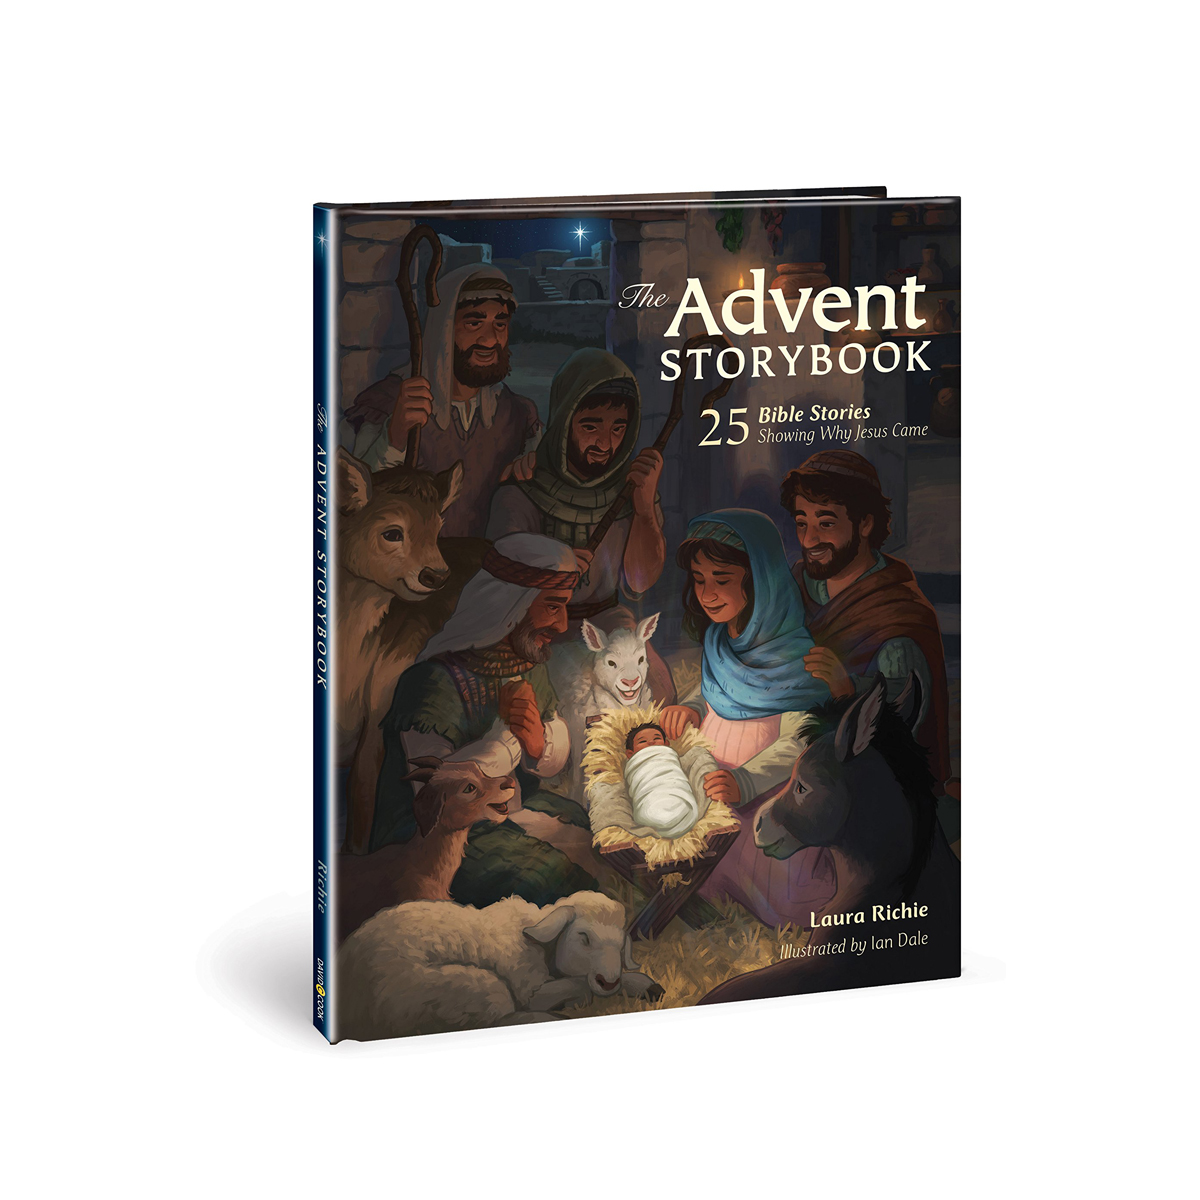 The Advent Storybook Link